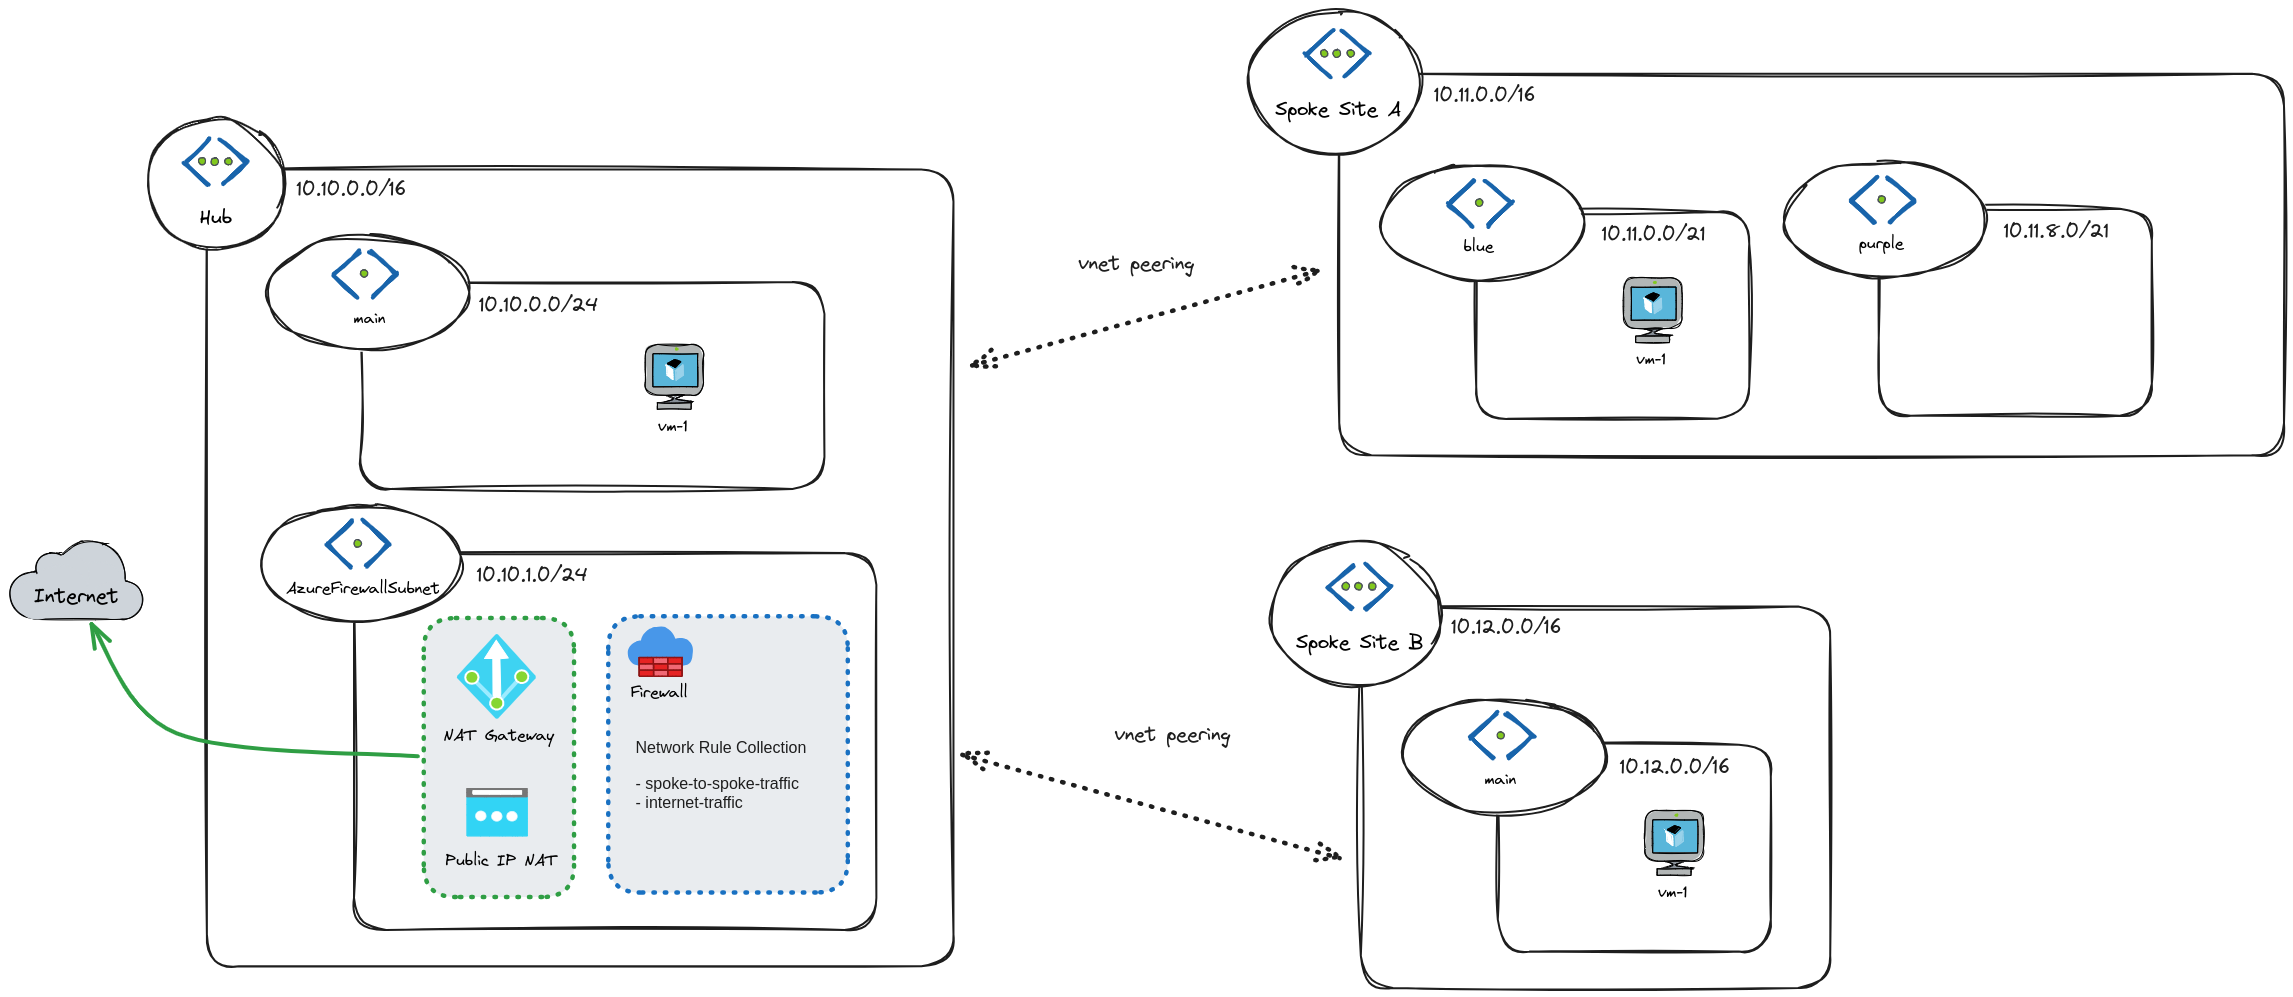 The image illustrates how we translated the previous network topology to the Azure cloud provider. It has additional resources such as NAT Gateway, Firewall, and Virtual Machines.